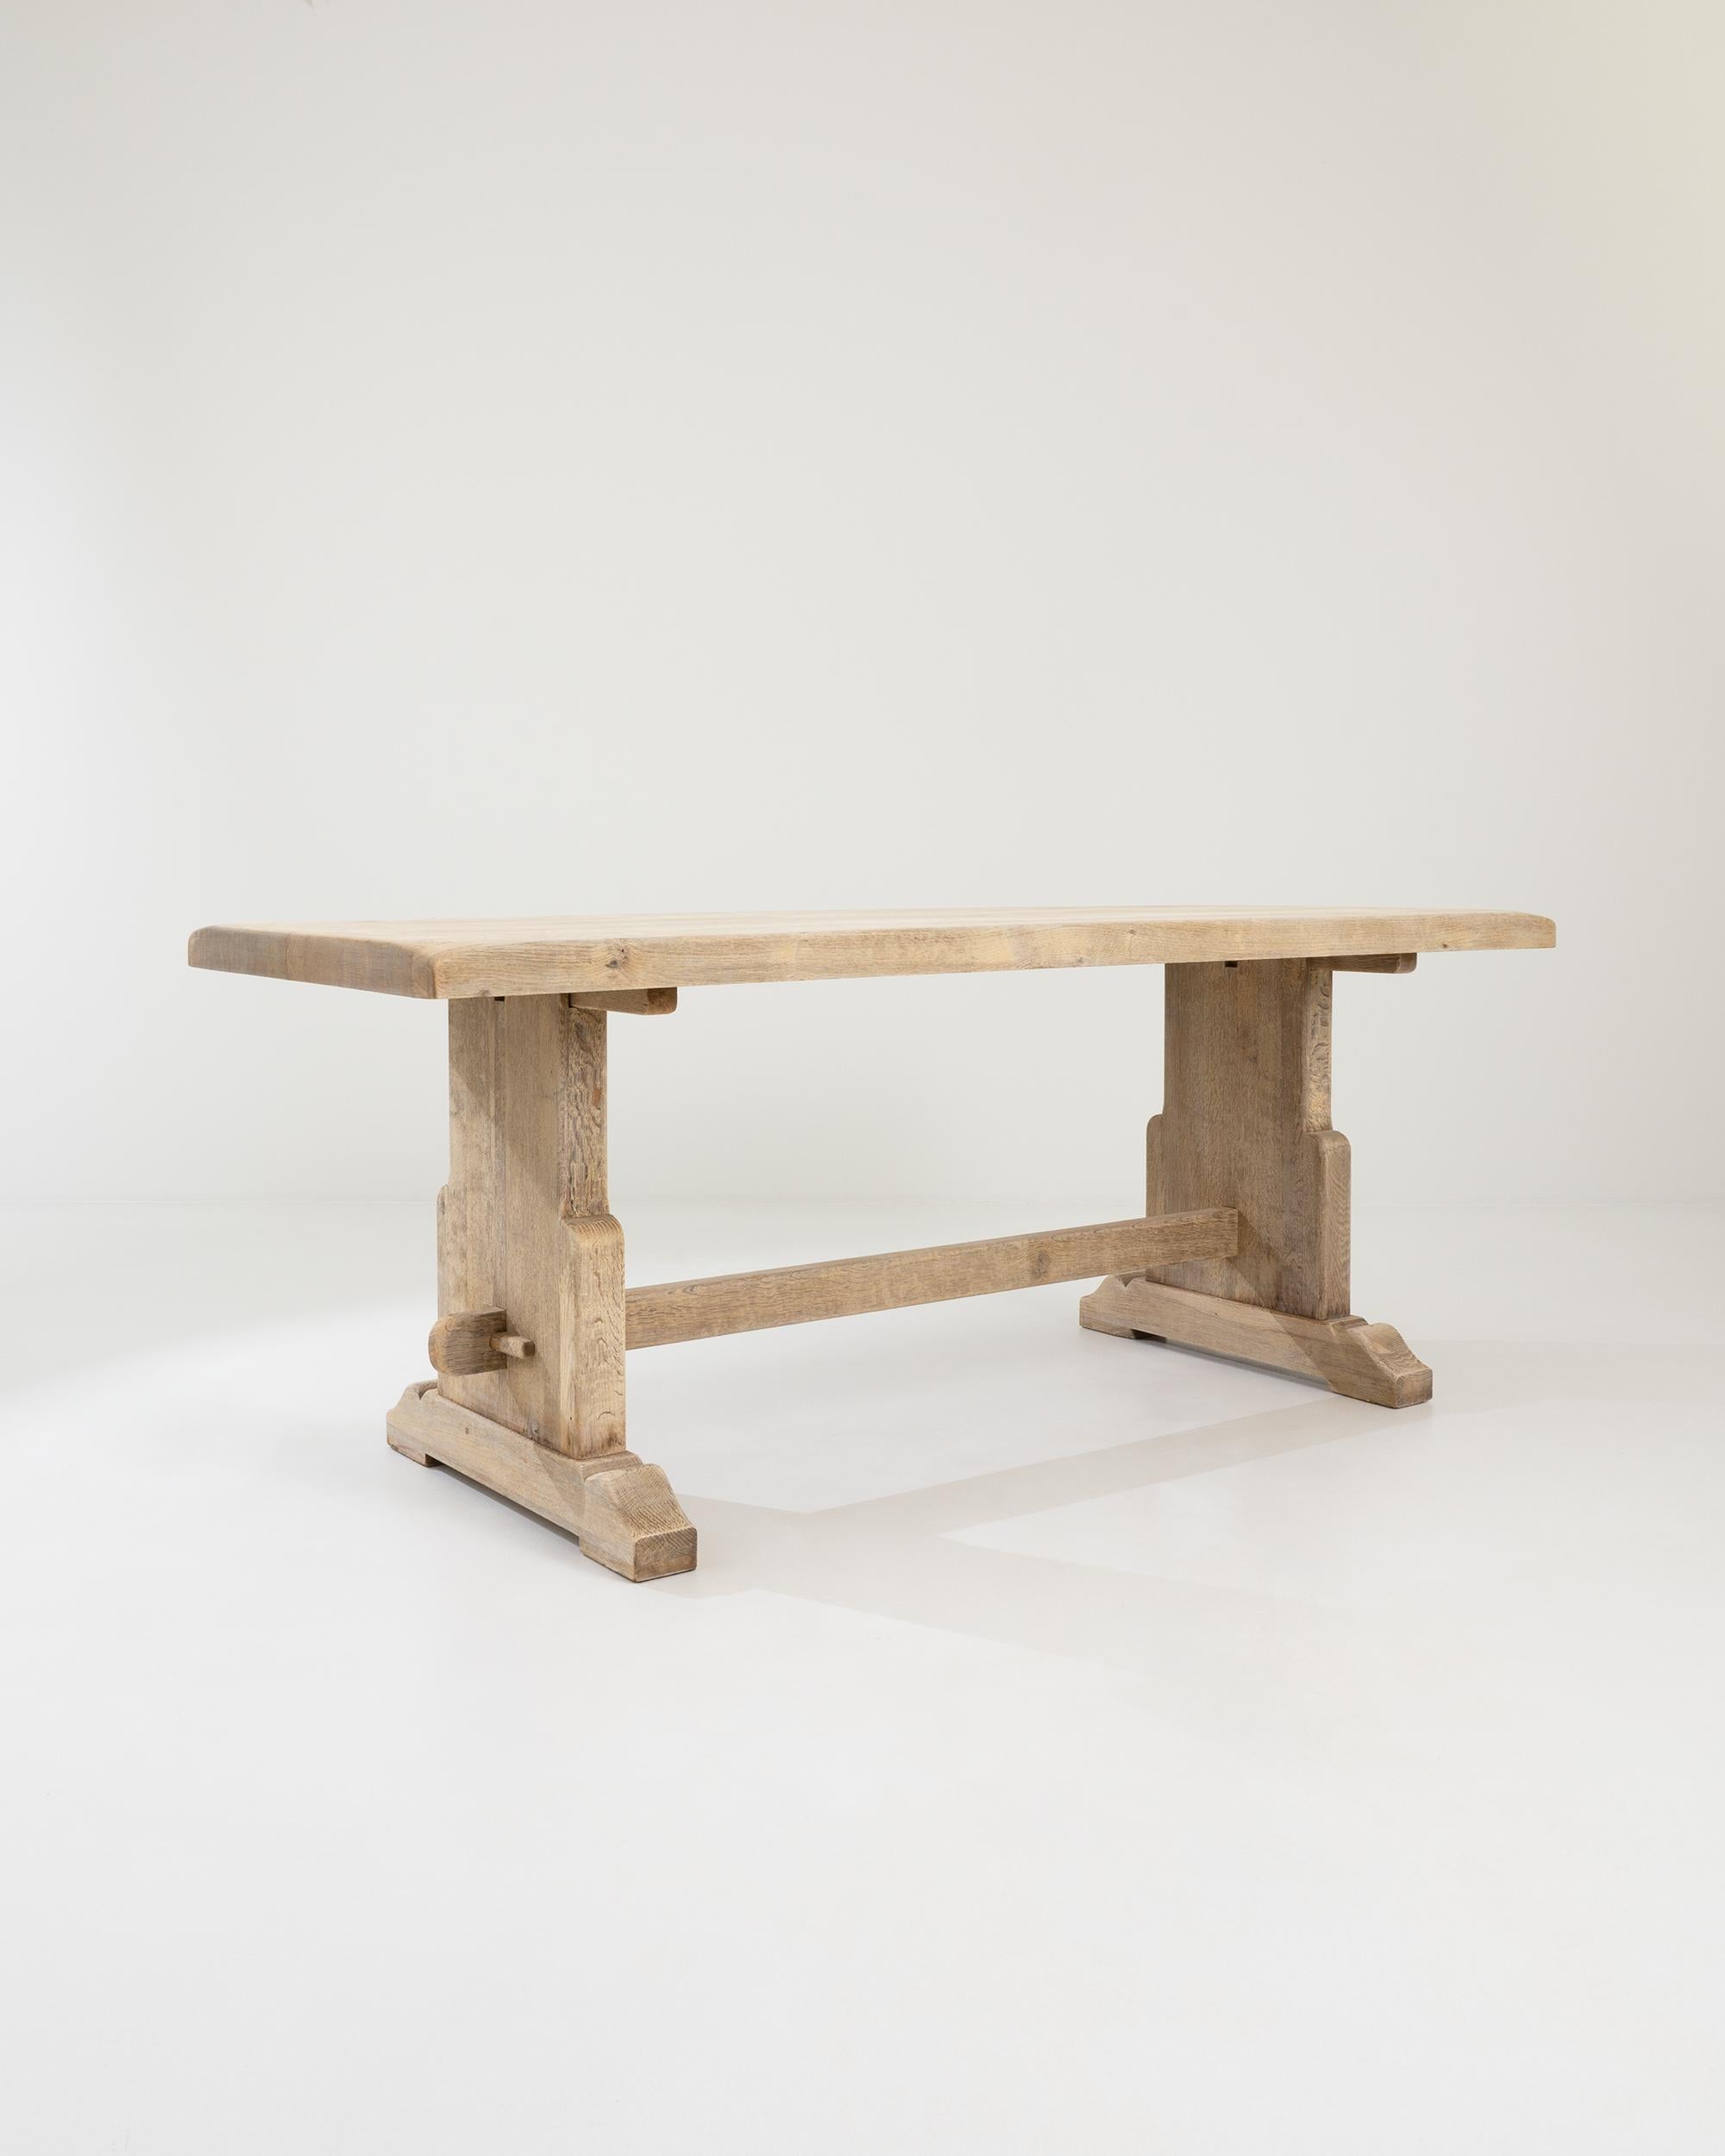 A wooden dining table created in 20th century Belgium. Characteristic of traditional Belgian design, this table is sturdily constructed and contains a forthright air of purpose and utilitarian function. Thick slabs of oak, thoughtfully joined